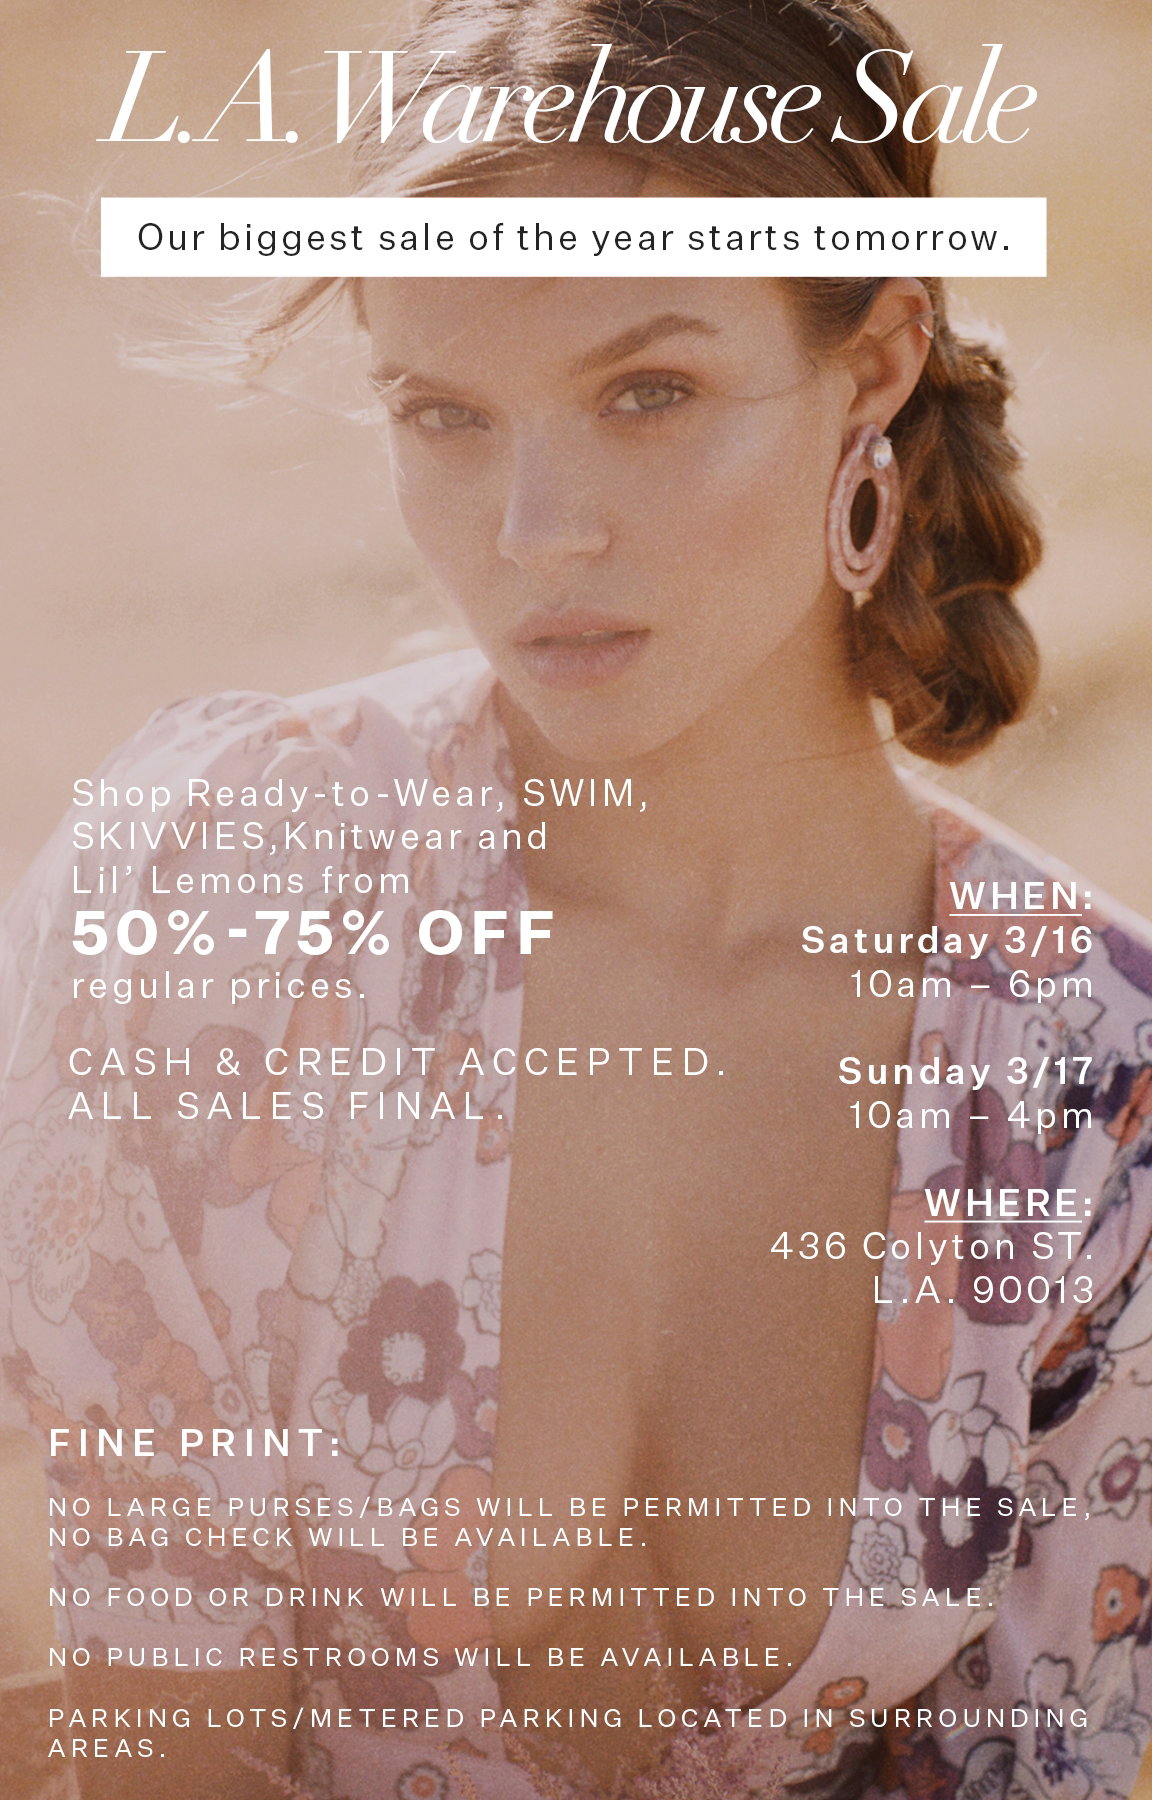 For Love & Lemons: L.A. WAREHOUSE SALE STARTS TOMORROW! | Milled